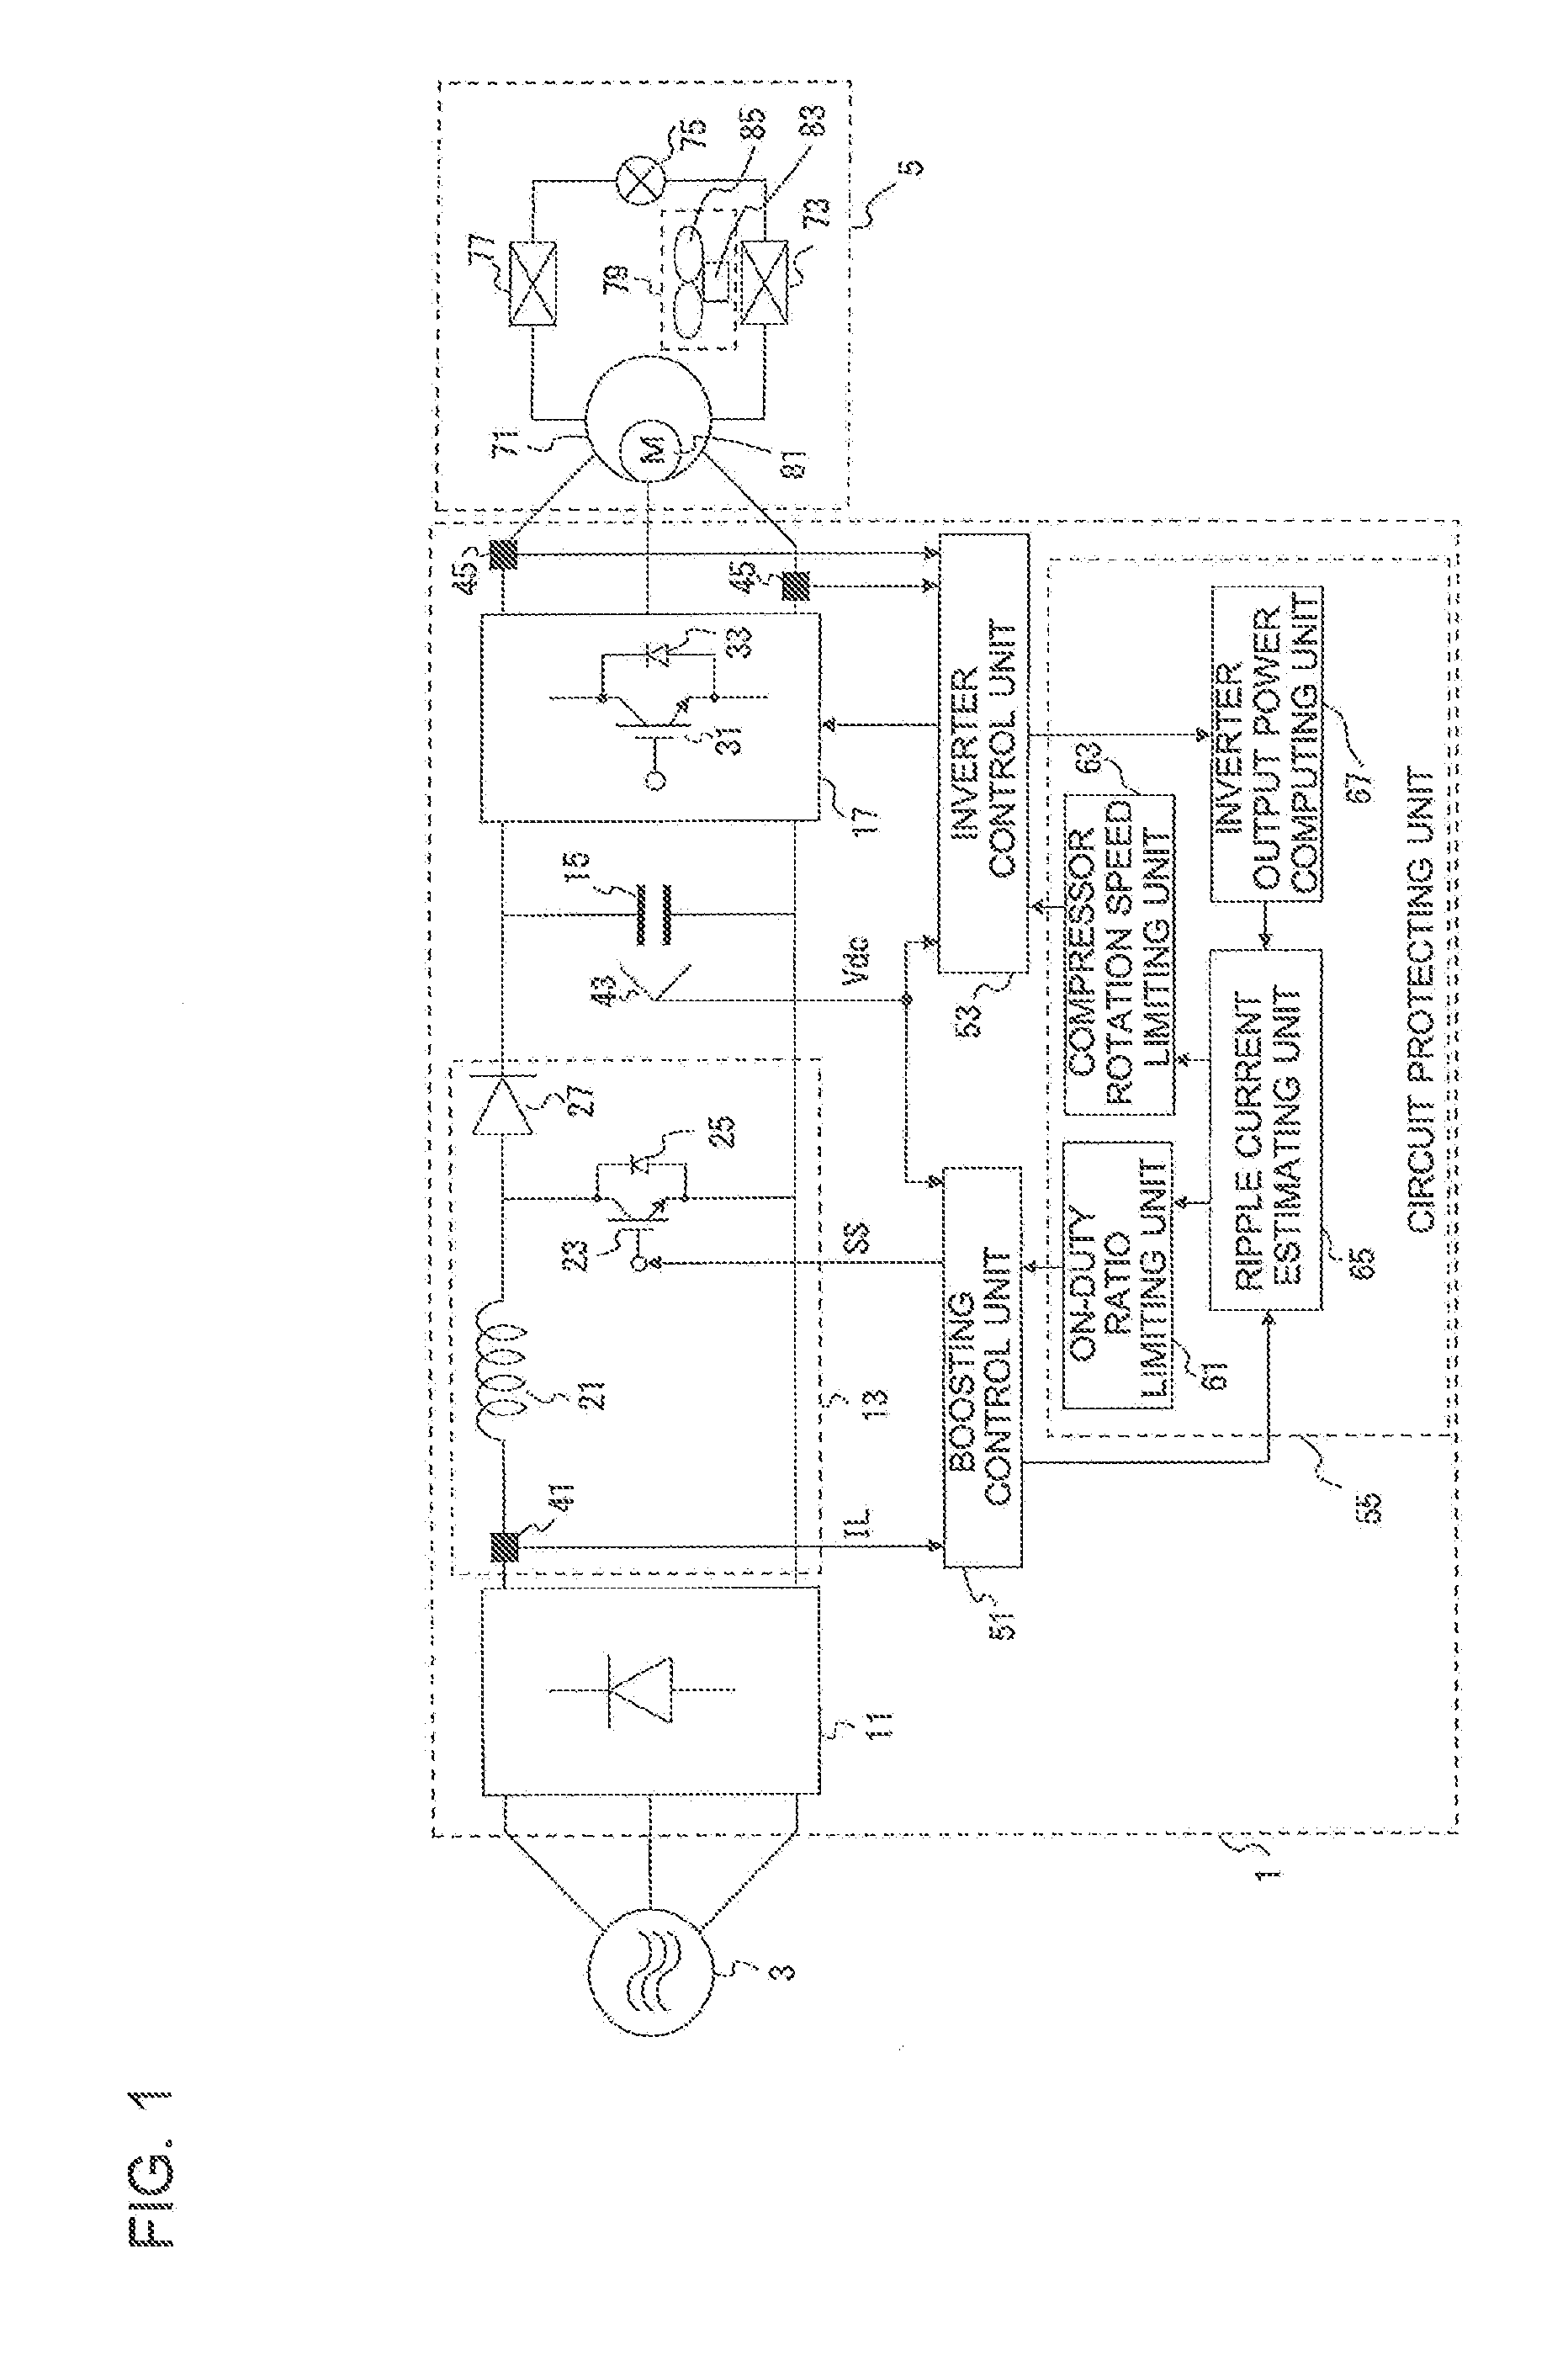 Motor drive control device, compressor, air-sending device, and air-conditioning apparatus